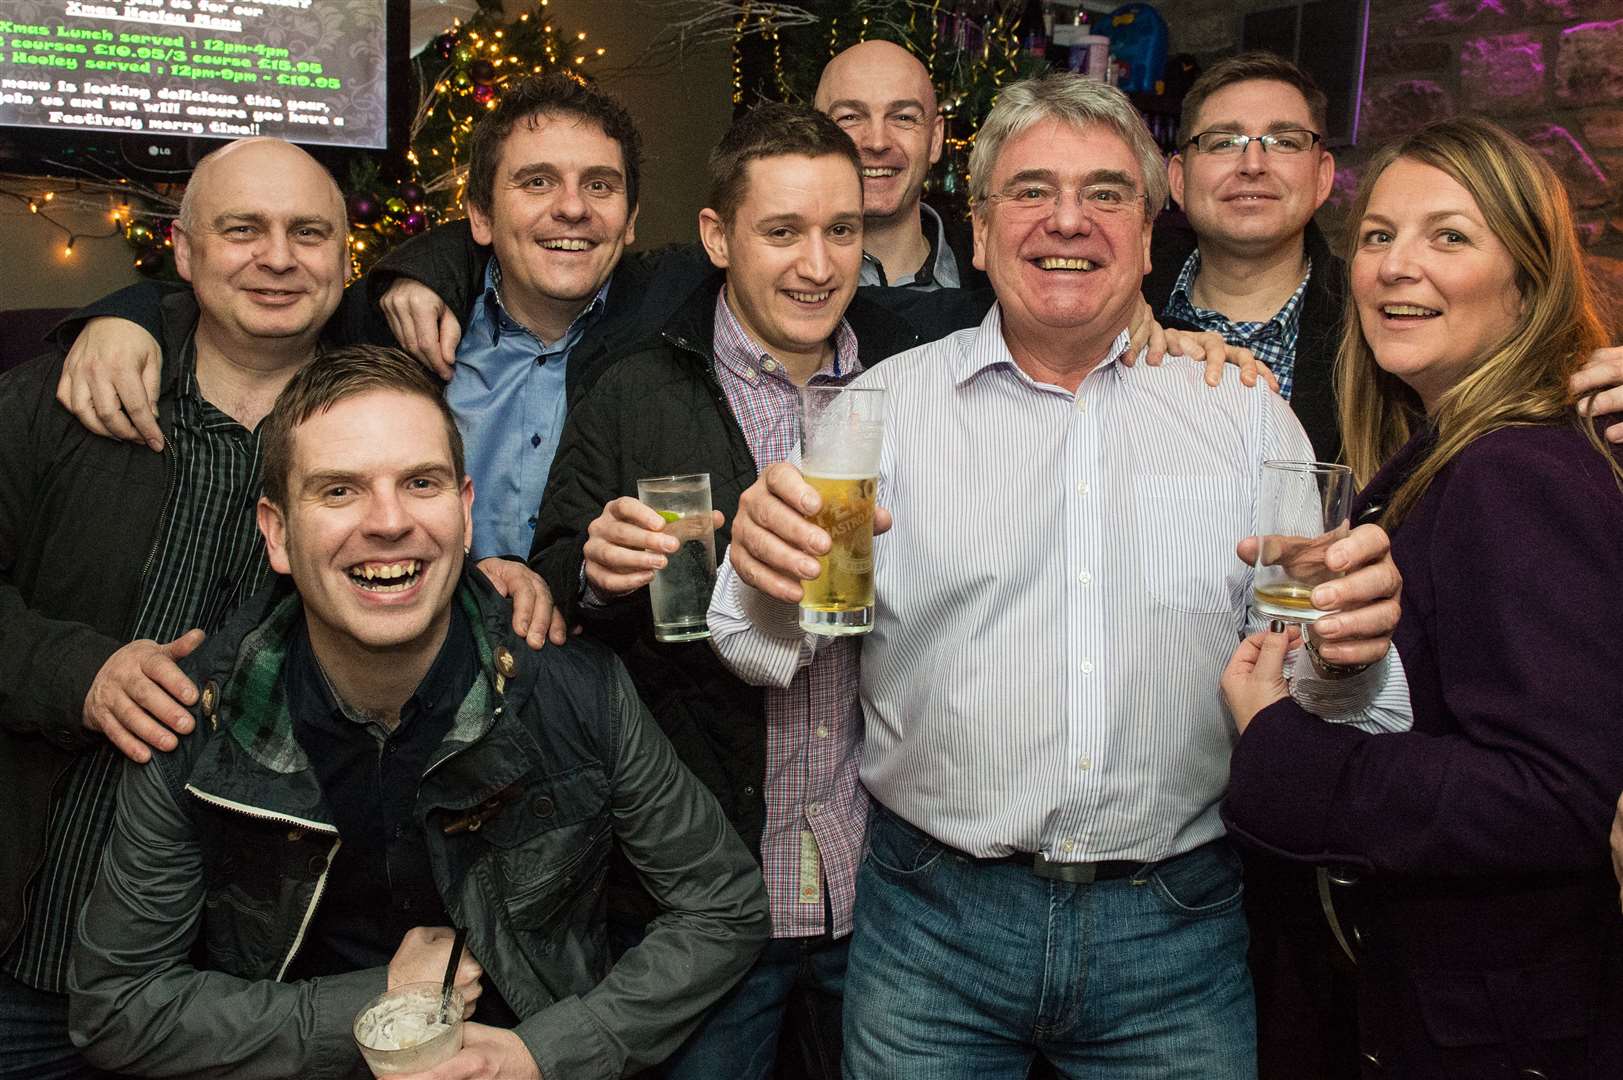 The Highland Office Equipment crew on a Christmas night out in the Den.